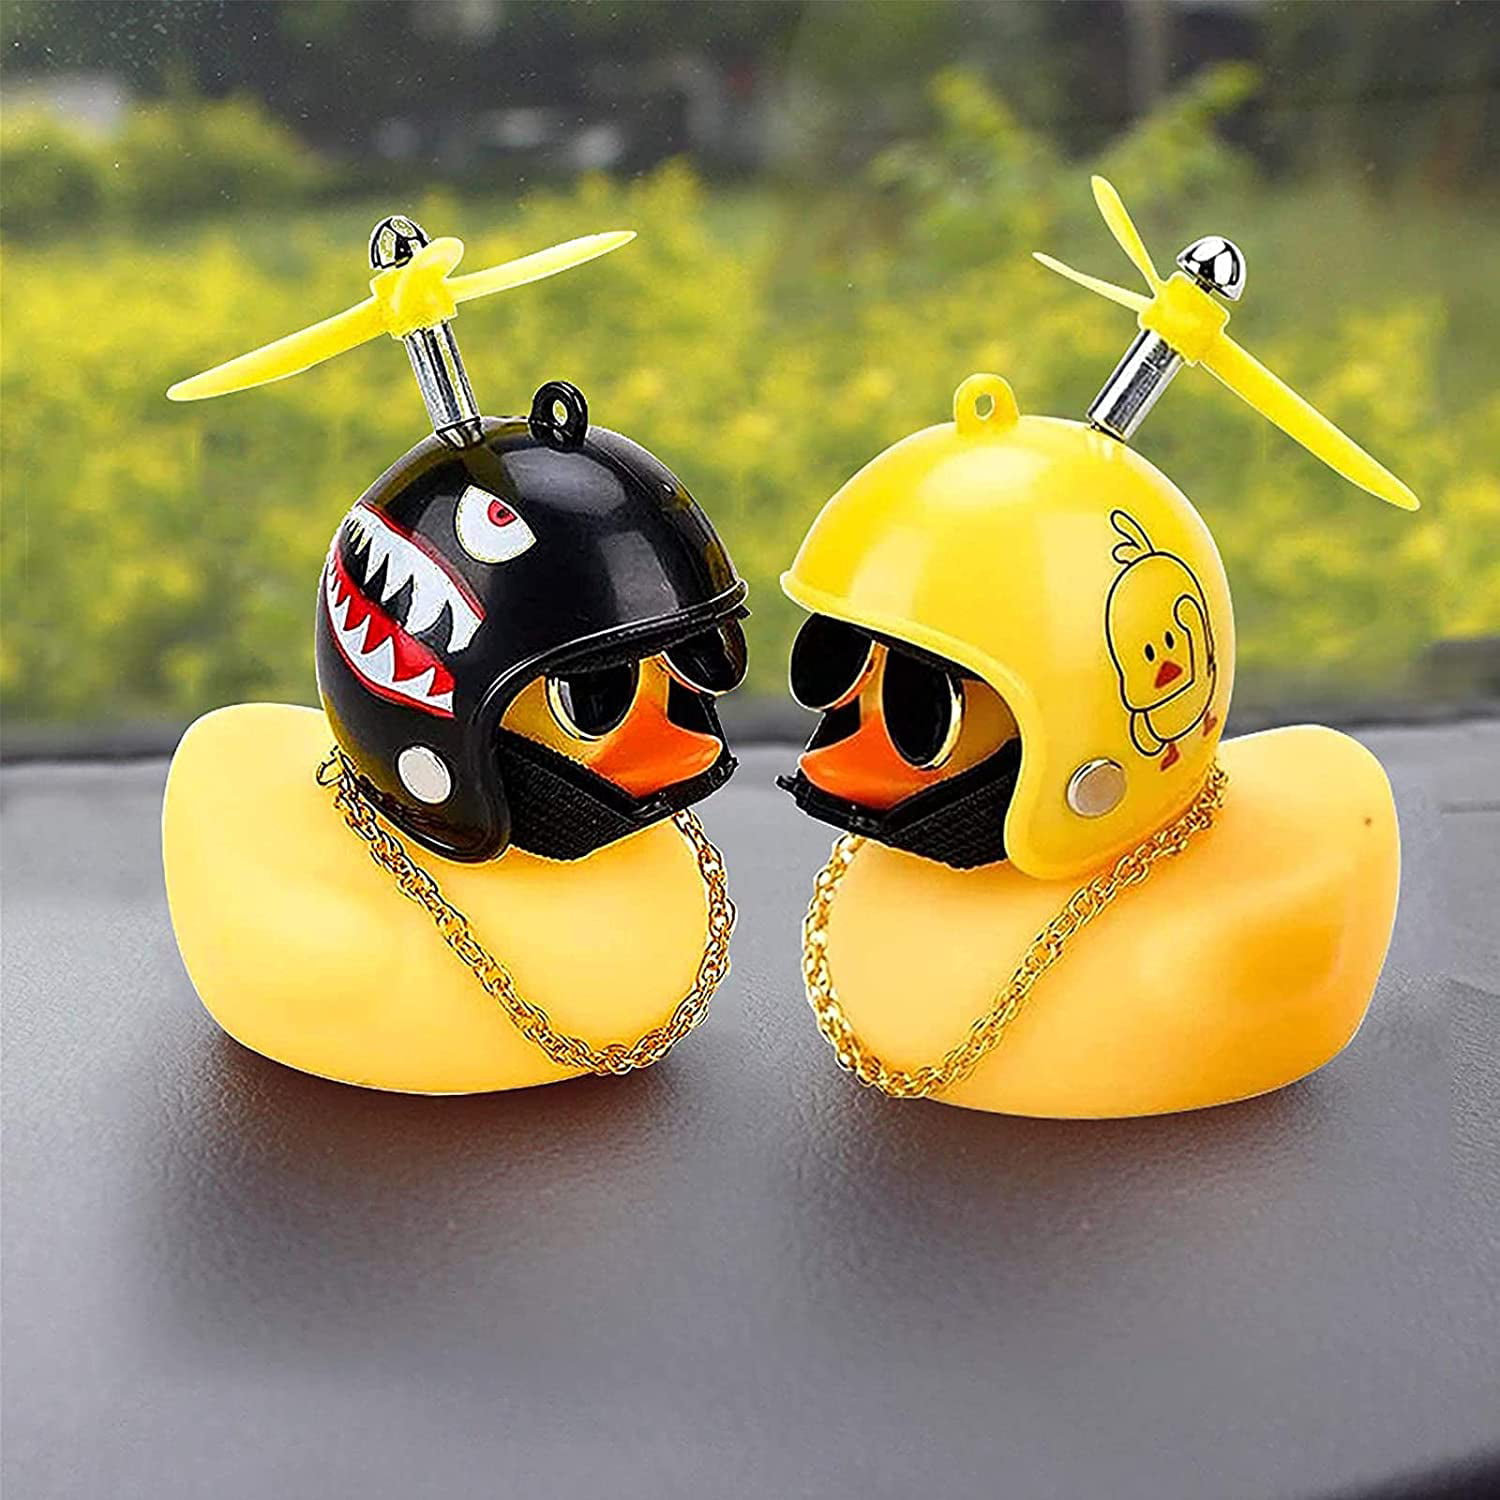 Duck Toy Car Ornaments,Rubber Yellow Duck Car Dashboard Decorations with Propeller Helmet Toys for Adults Women Men Childs 